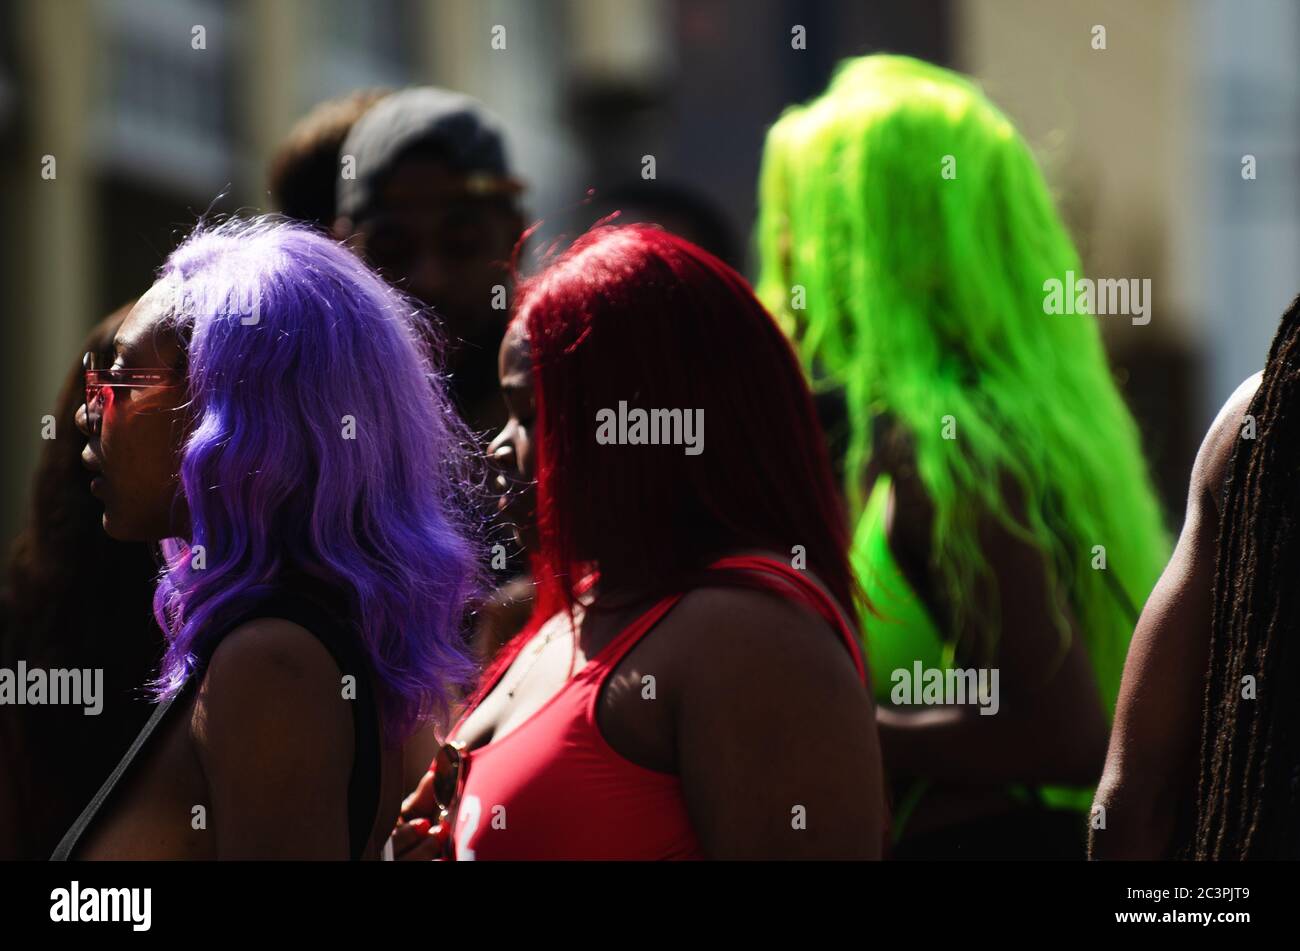 MIAMI - MARCH 17, 2019: Young women with brightly colored hair walk through a gathering of college students celebrating spring break on Ocean Drive. Stock Photo